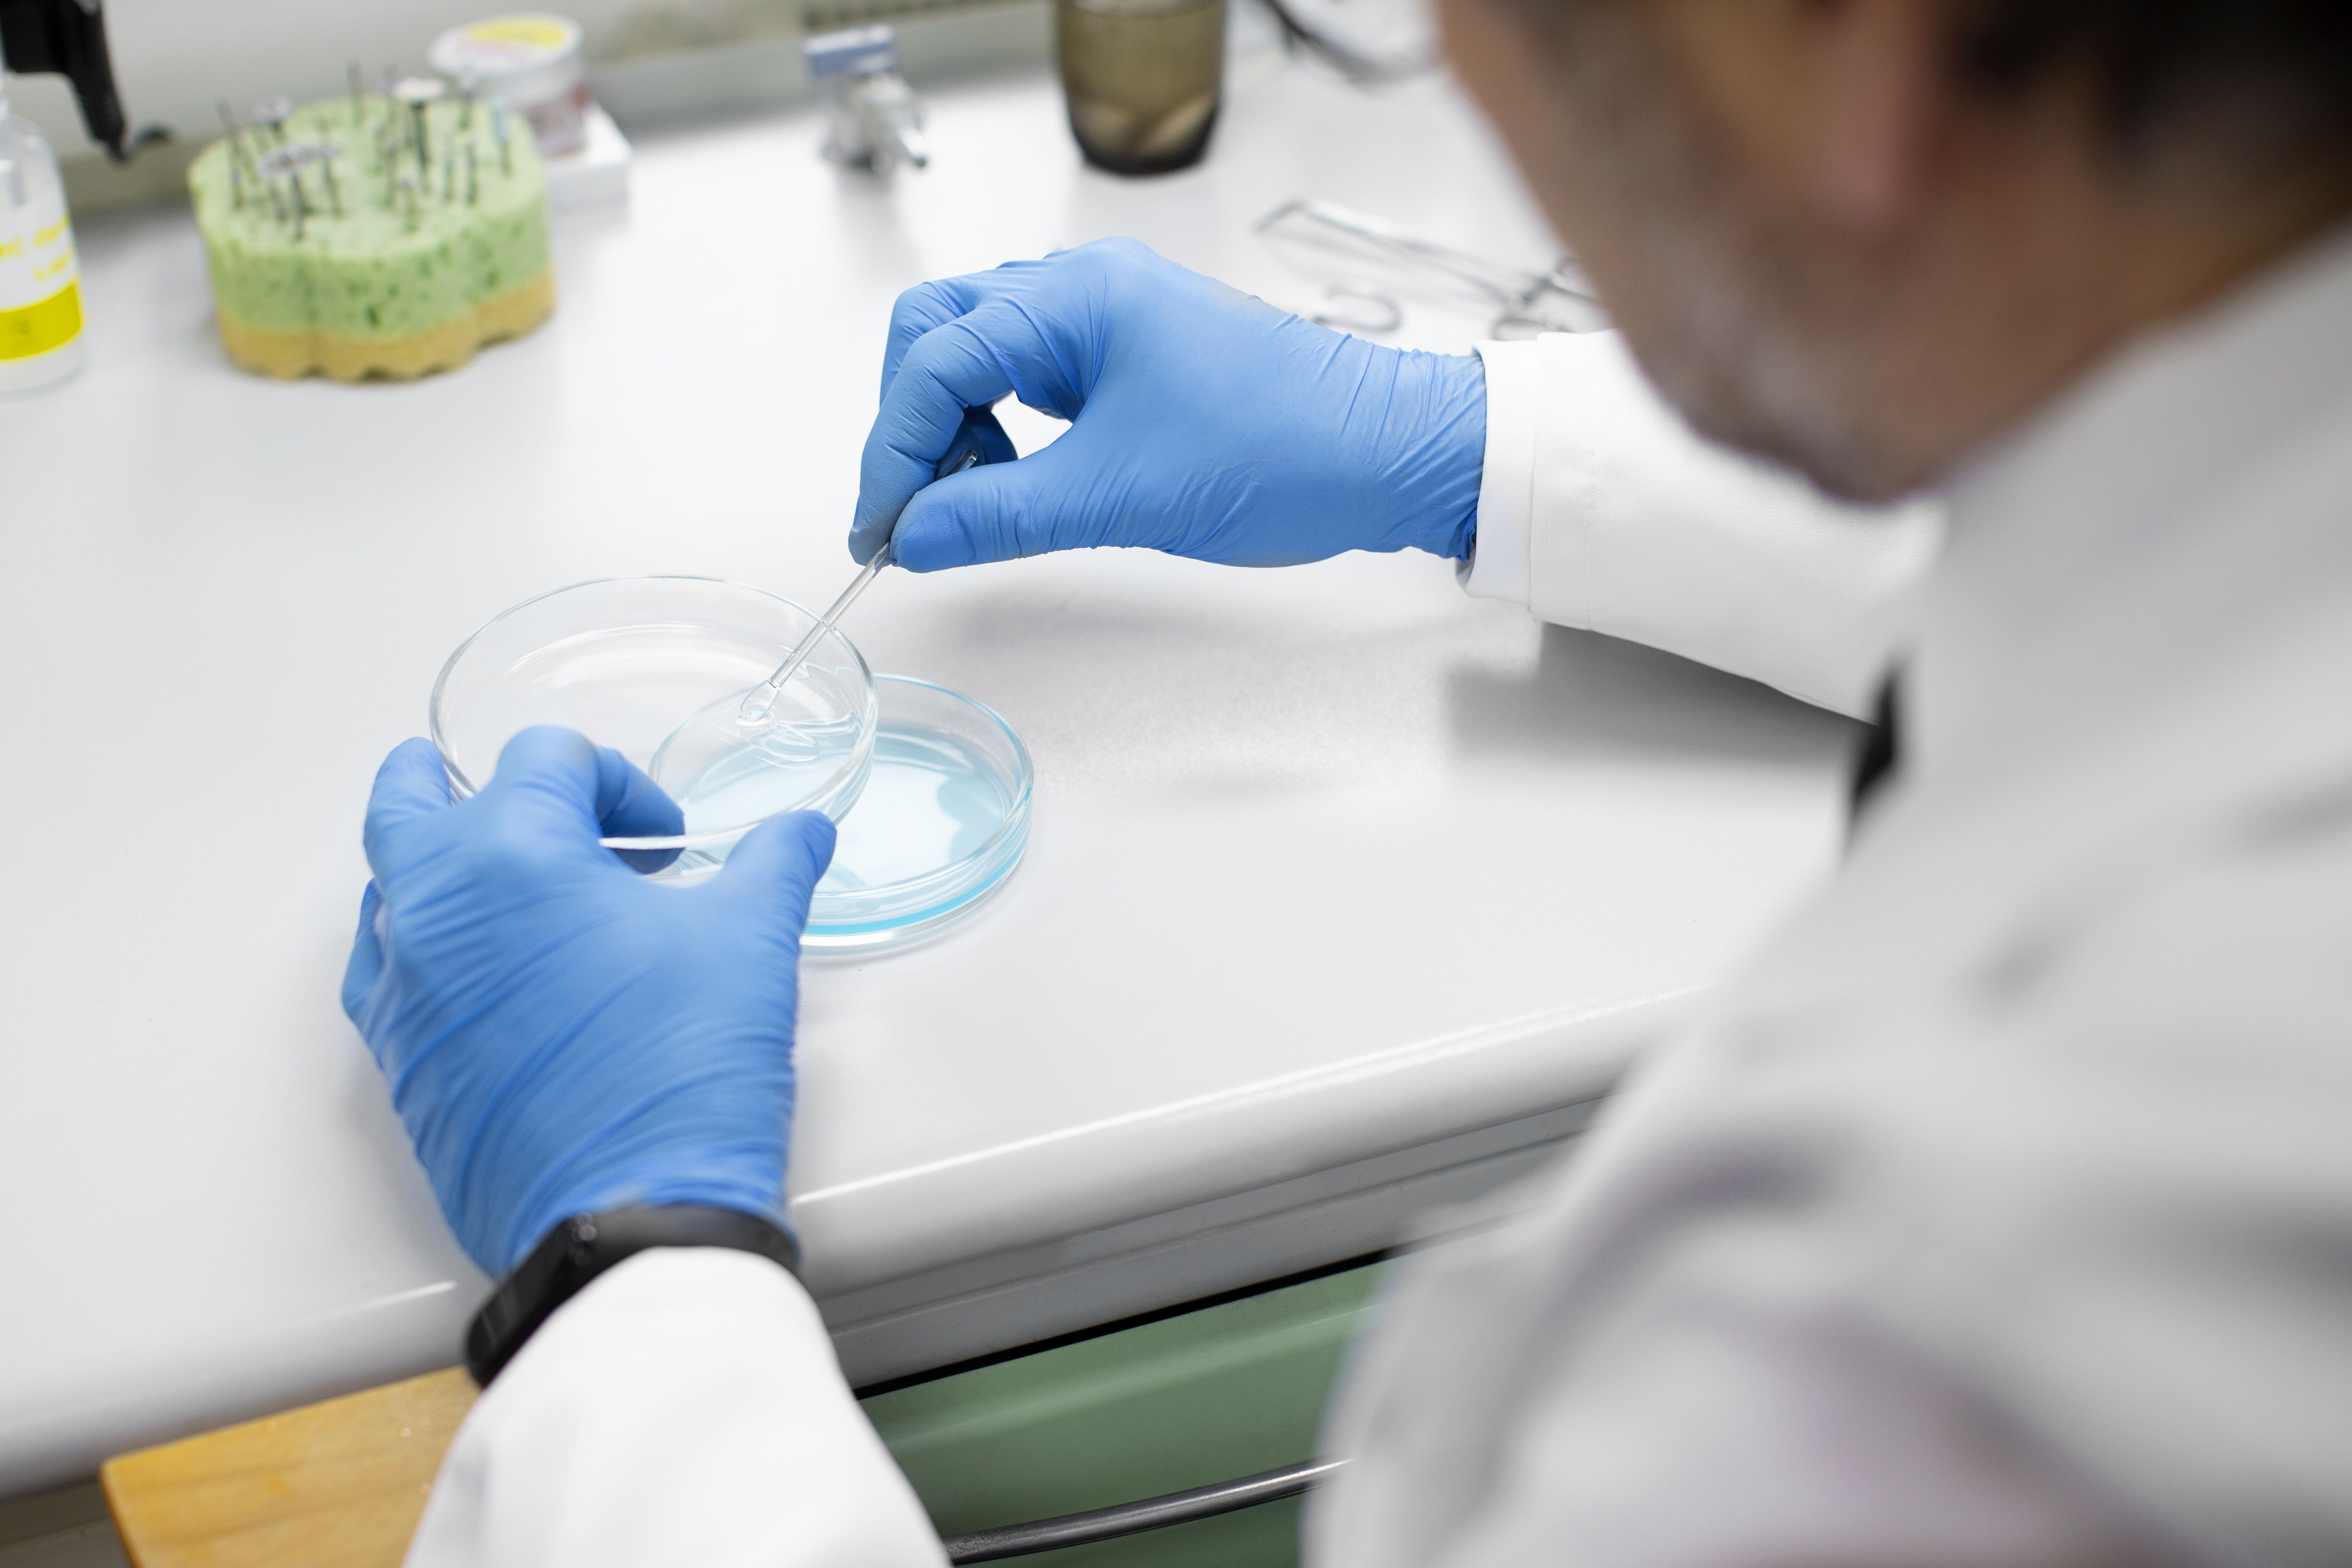 Male with blue gloves handling a petri dish with blue liquid